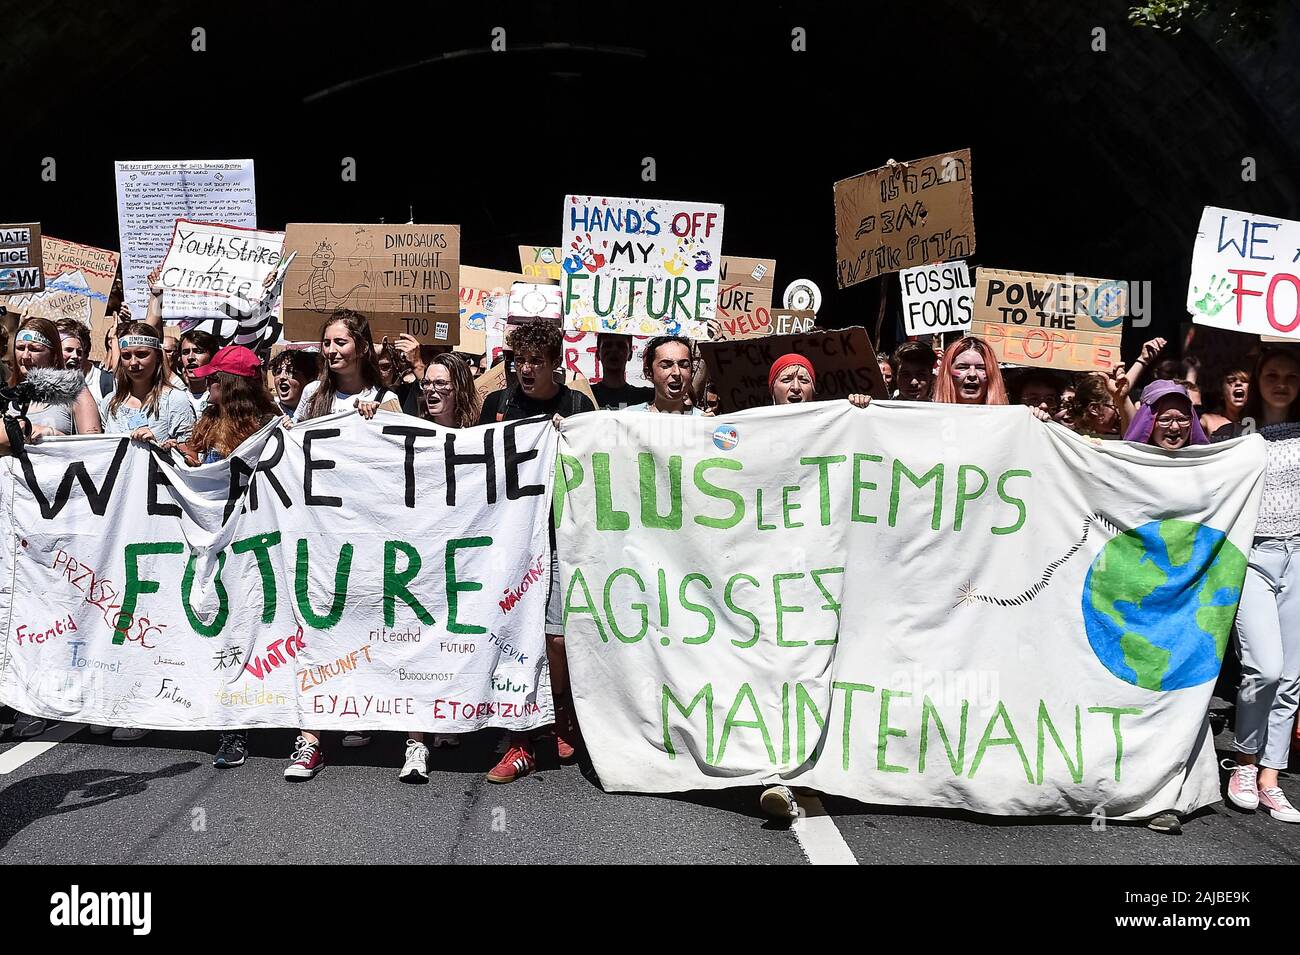 Lausanne, Switzerland - 09 August, 2019: Climate activists attend a Fridays For Future strike for climate protection that is part of 'SMILE for Future' event. More than 450 young climate activists from different European countries gathered to attend the summit 'SMILE for Future', that stands for Summer Meeting in Lausanne Europe. The aim of the summit is to reinforce the links between the participants of the European Youth Climate Strike movement and to define the future of the mobilisation against climate change. Credit: Nicolò Campo/Alamy Live News Stock Photo